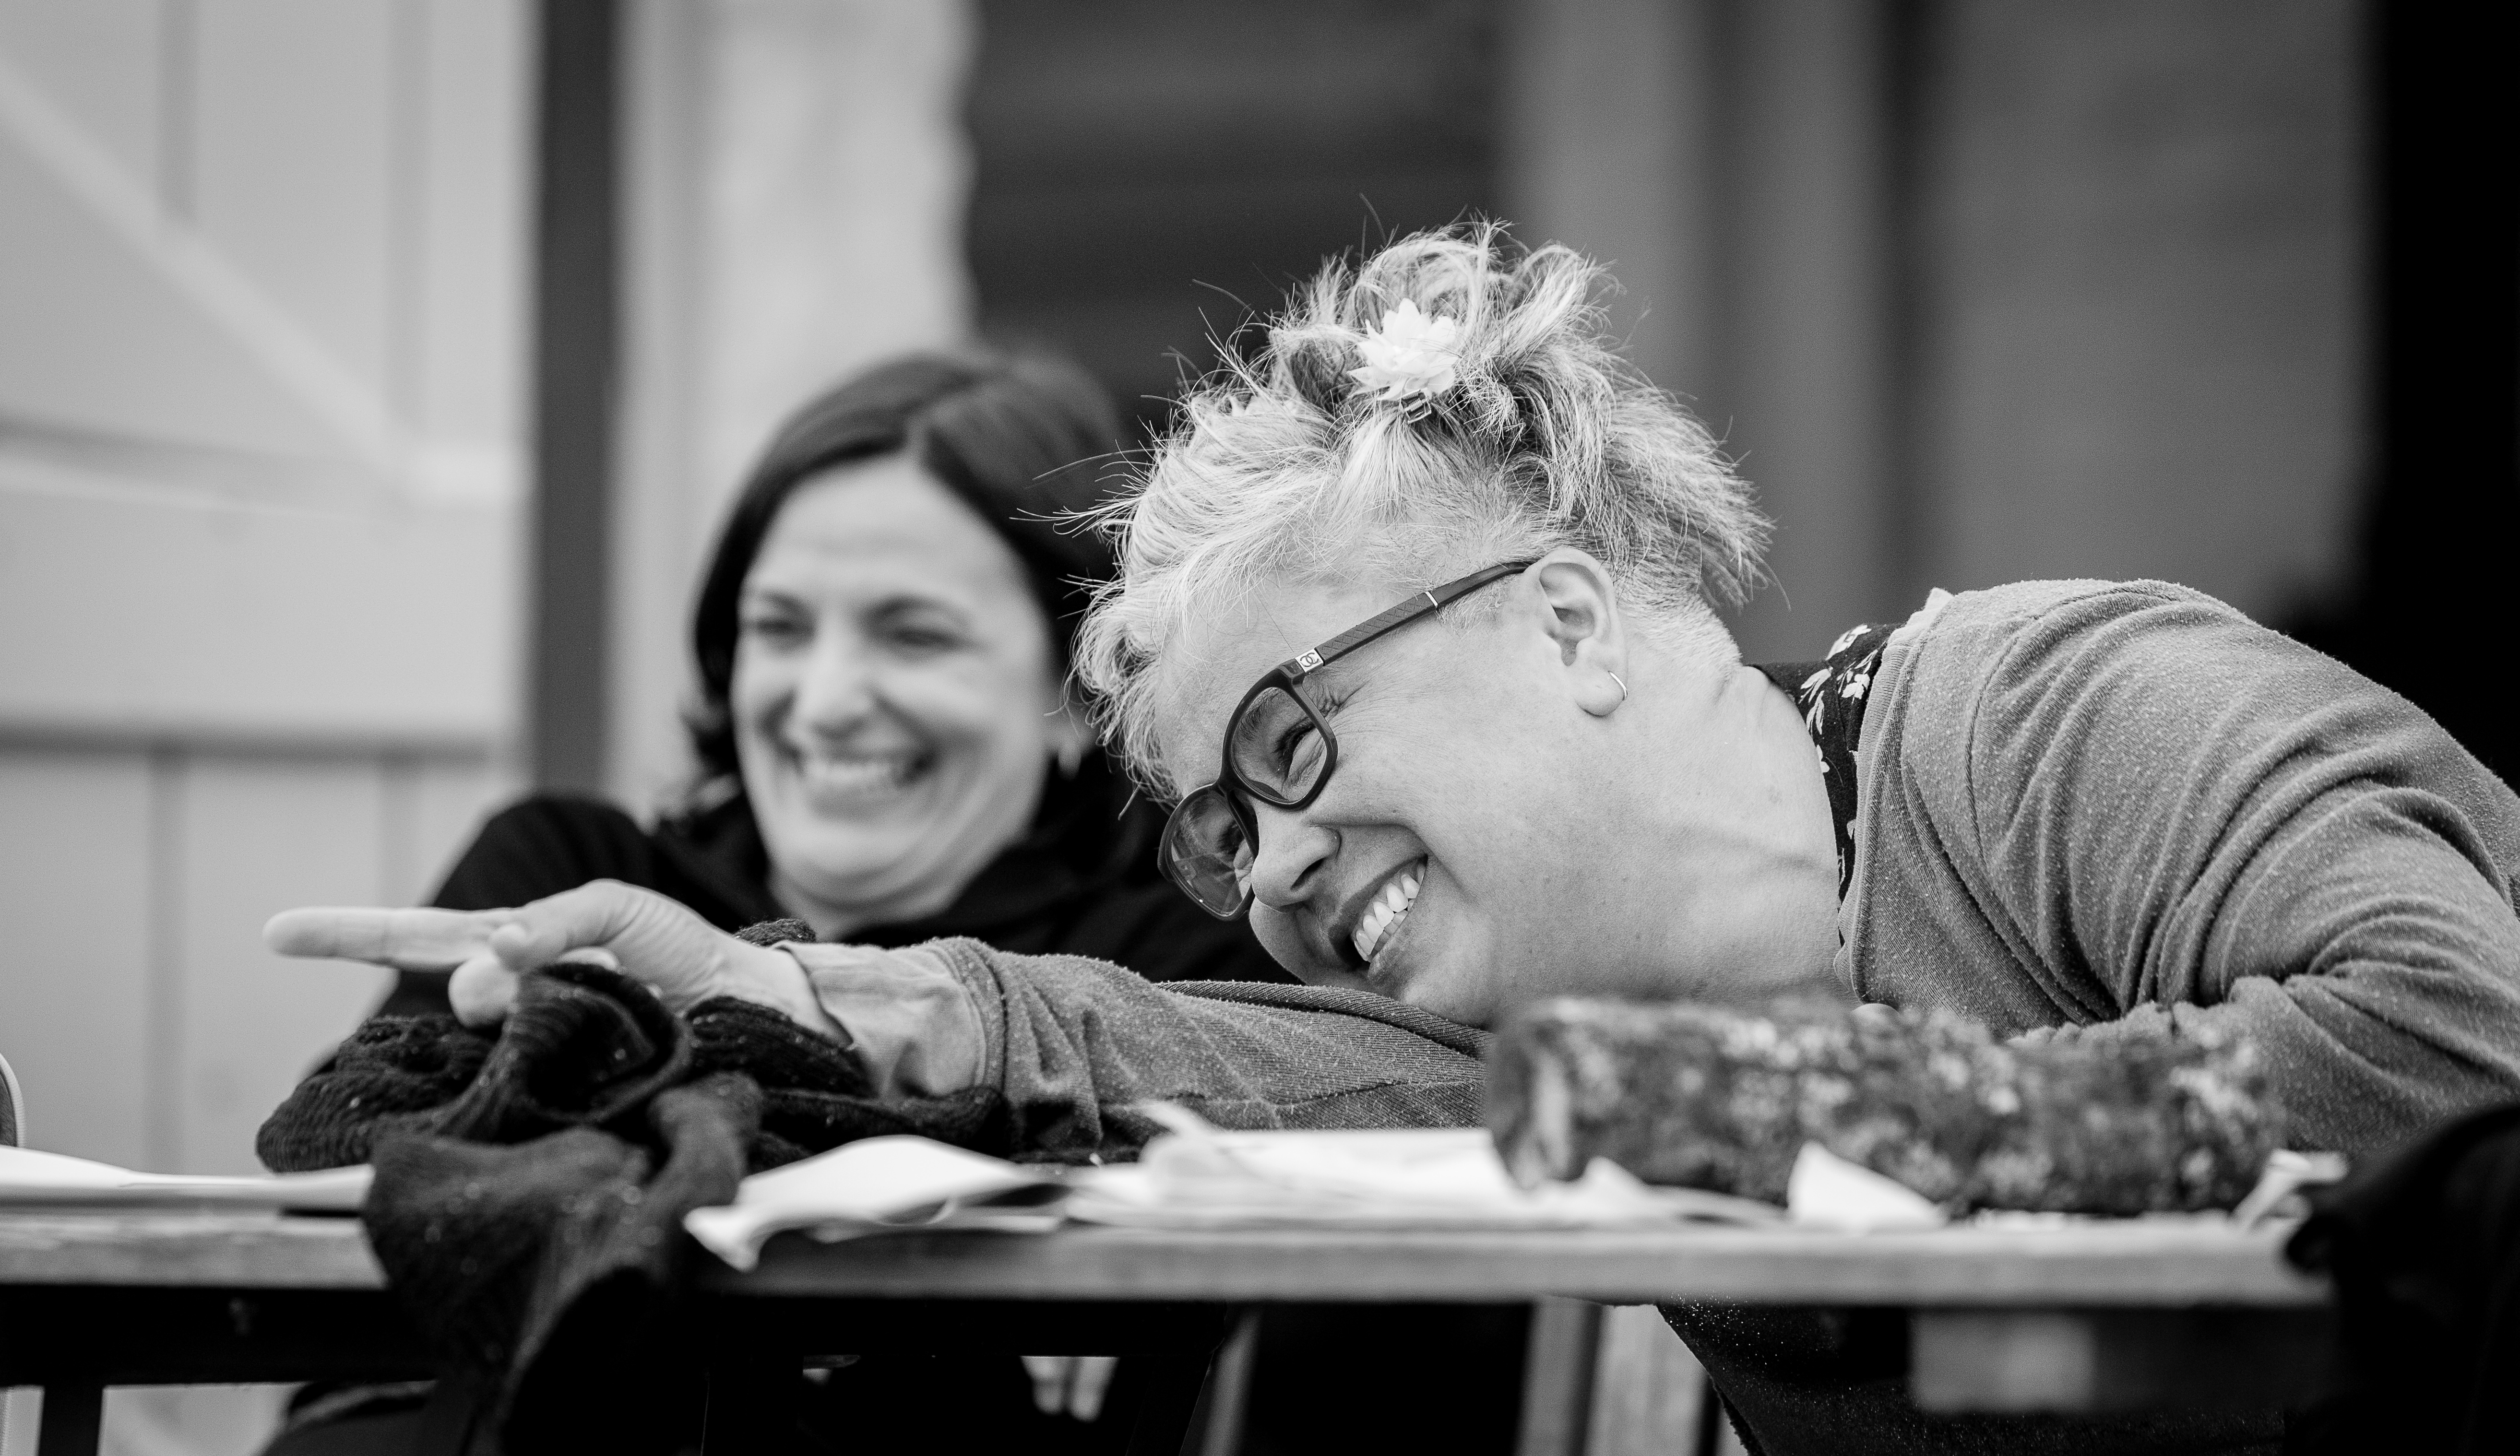 Two women laughing and having a conversation at a table.